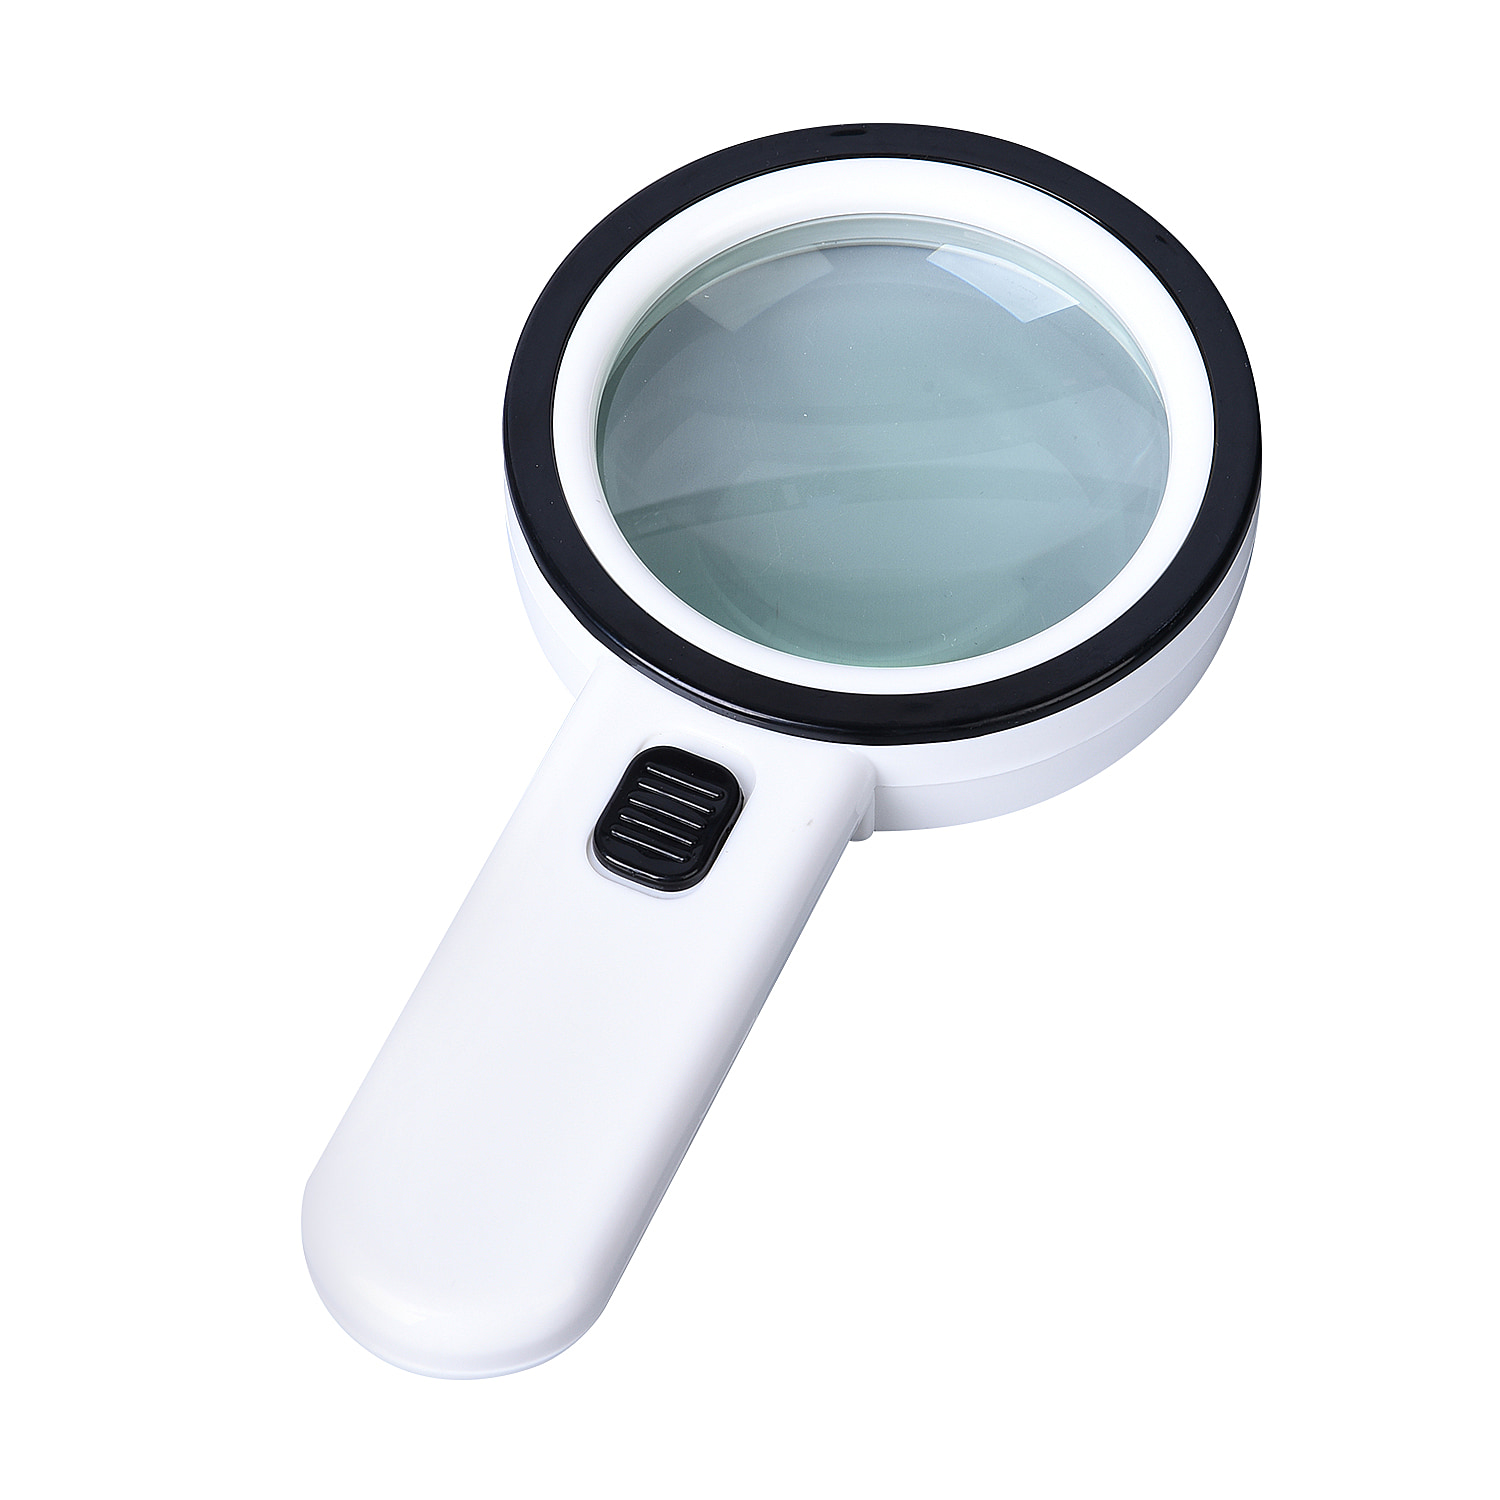 Handheld Large Magnifying Glass with 12 LED Illuminated Lighted Magnifier - 30x (Requires 2 AA batteries, Not included)